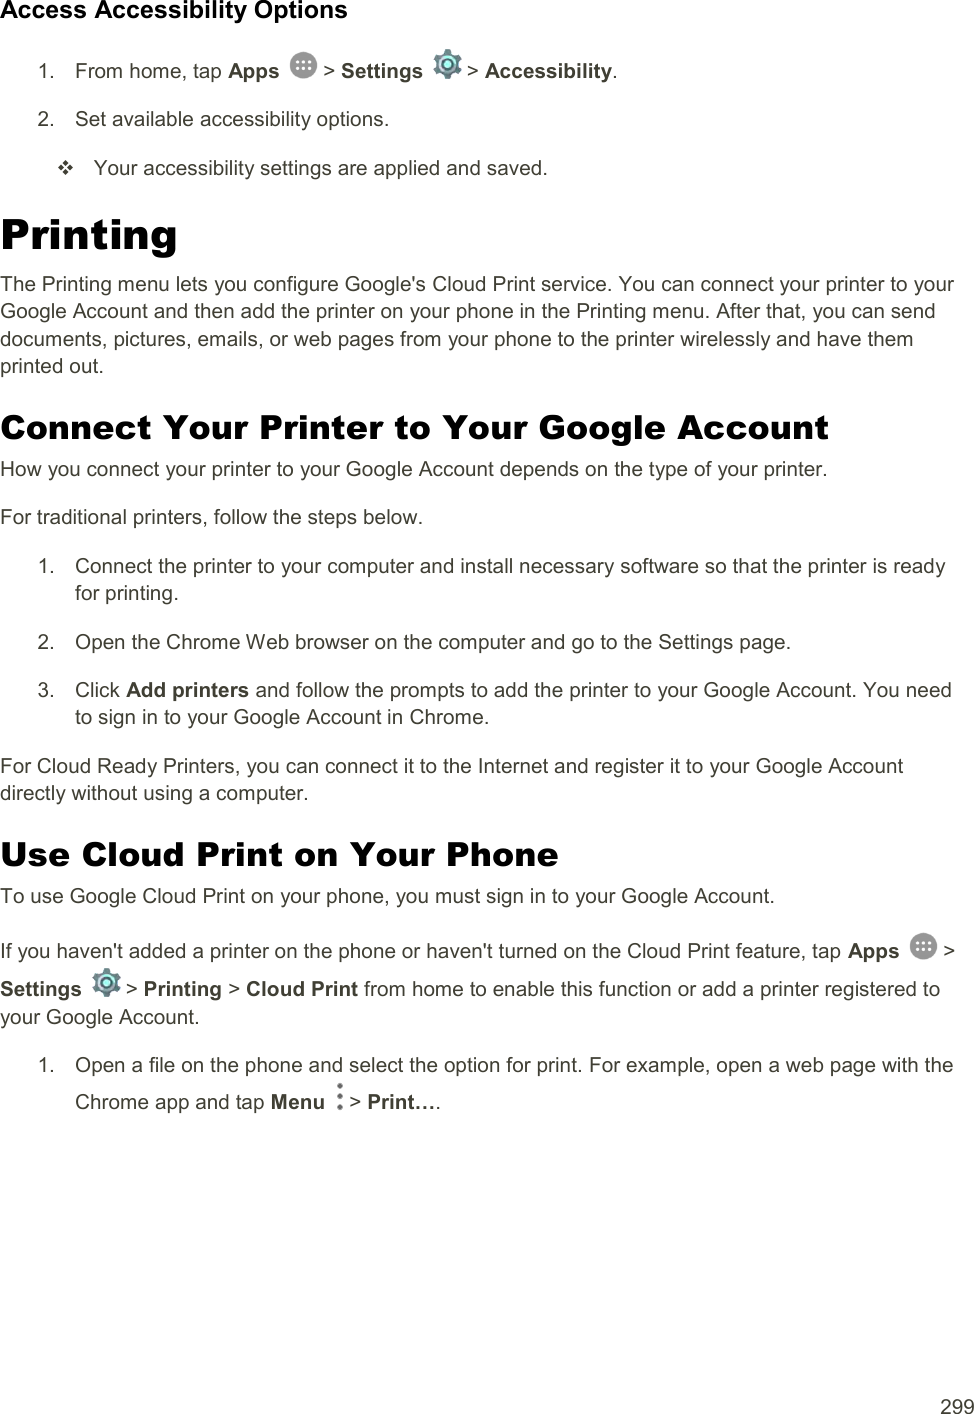  299 Access Accessibility Options 1.  From home, tap Apps   &gt; Settings   &gt; Accessibility. 2.  Set available accessibility options.   Your accessibility settings are applied and saved. Printing The Printing menu lets you configure Google&apos;s Cloud Print service. You can connect your printer to your Google Account and then add the printer on your phone in the Printing menu. After that, you can send documents, pictures, emails, or web pages from your phone to the printer wirelessly and have them printed out. Connect Your Printer to Your Google Account How you connect your printer to your Google Account depends on the type of your printer. For traditional printers, follow the steps below. 1.  Connect the printer to your computer and install necessary software so that the printer is ready for printing. 2.  Open the Chrome Web browser on the computer and go to the Settings page. 3.  Click Add printers and follow the prompts to add the printer to your Google Account. You need to sign in to your Google Account in Chrome. For Cloud Ready Printers, you can connect it to the Internet and register it to your Google Account directly without using a computer. Use Cloud Print on Your Phone To use Google Cloud Print on your phone, you must sign in to your Google Account. If you haven&apos;t added a printer on the phone or haven&apos;t turned on the Cloud Print feature, tap Apps   &gt; Settings   &gt; Printing &gt; Cloud Print from home to enable this function or add a printer registered to your Google Account. 1.  Open a file on the phone and select the option for print. For example, open a web page with the Chrome app and tap Menu   &gt; Print…. 